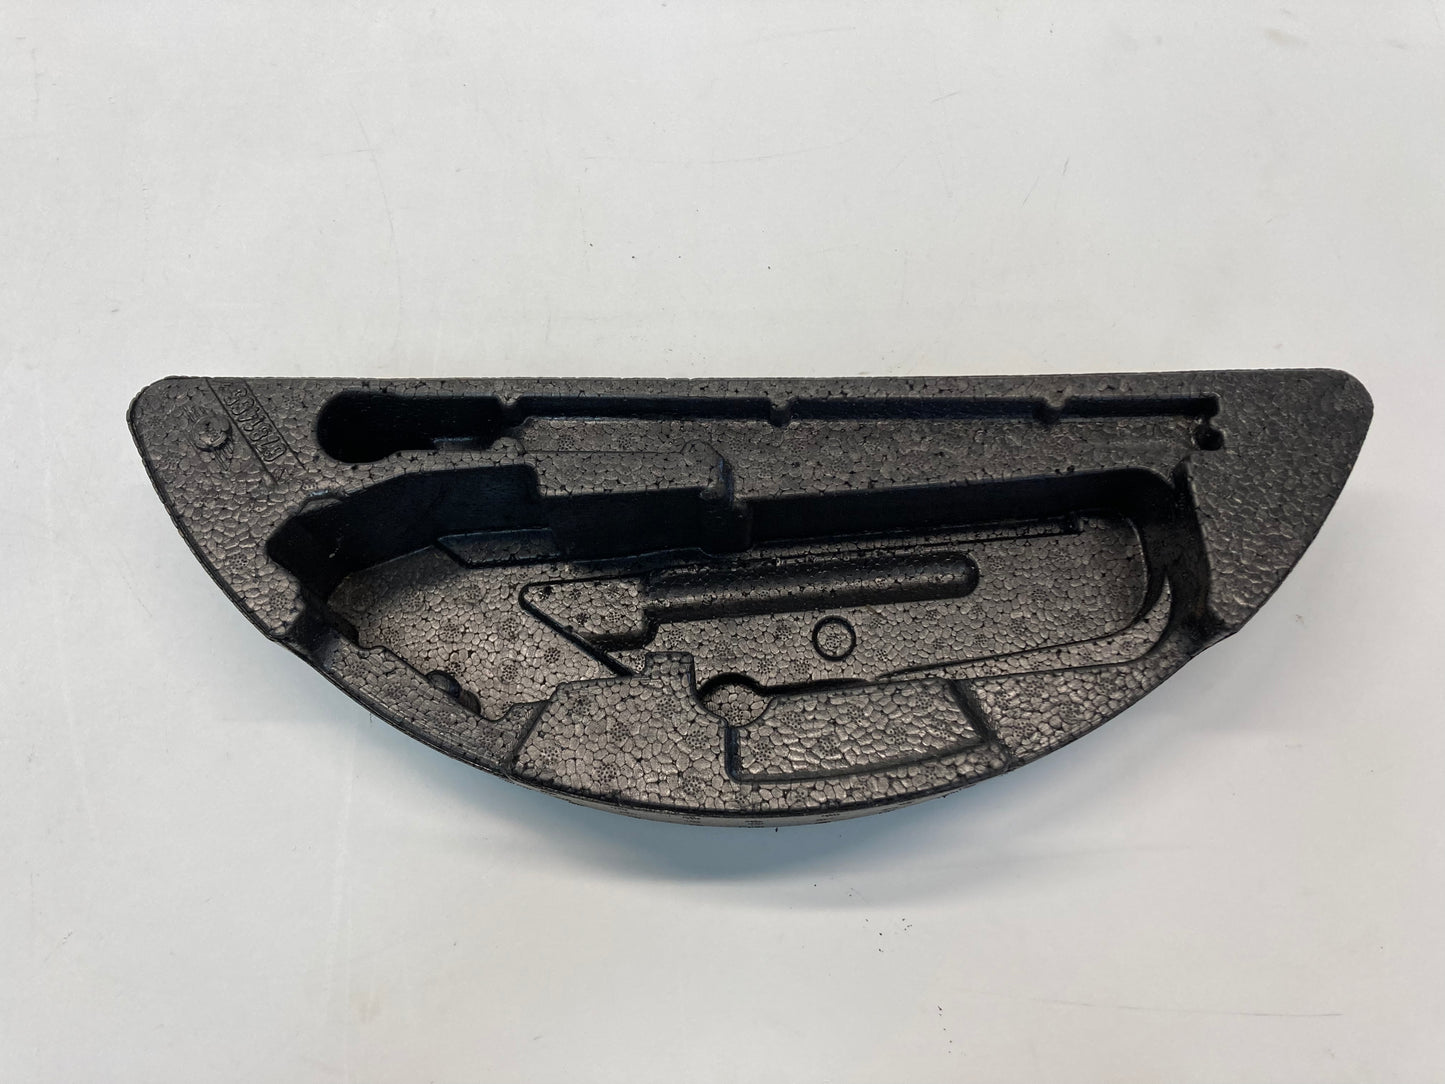 Mini Cooper Clubman Tray for Vehicle Jack 71106781465 08-14 R55